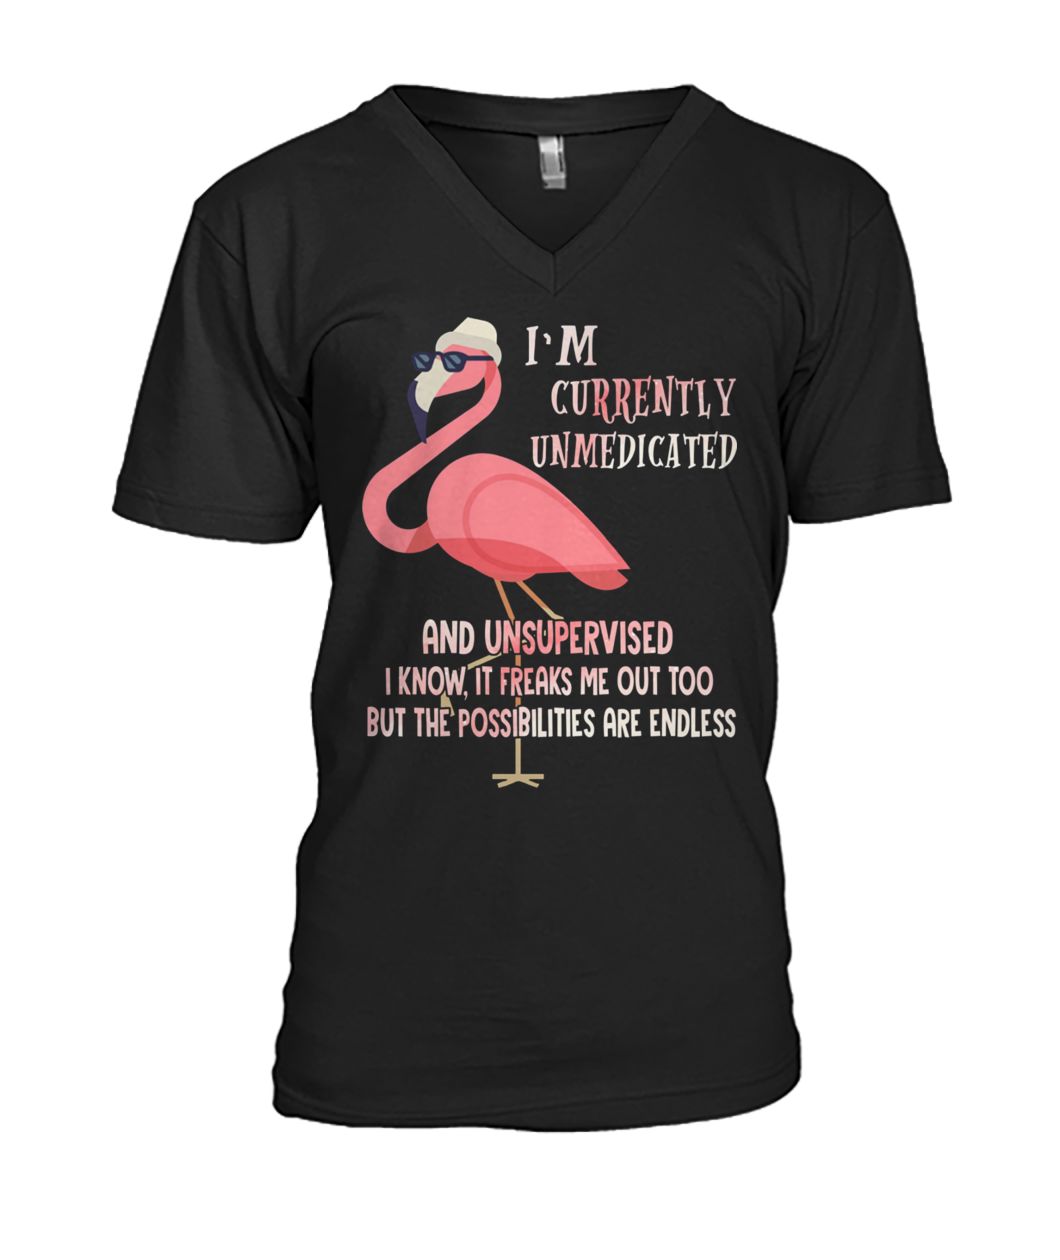 I'm currently unmedicated and unsupervised I know it freaks me out too flamingo mens v-neck